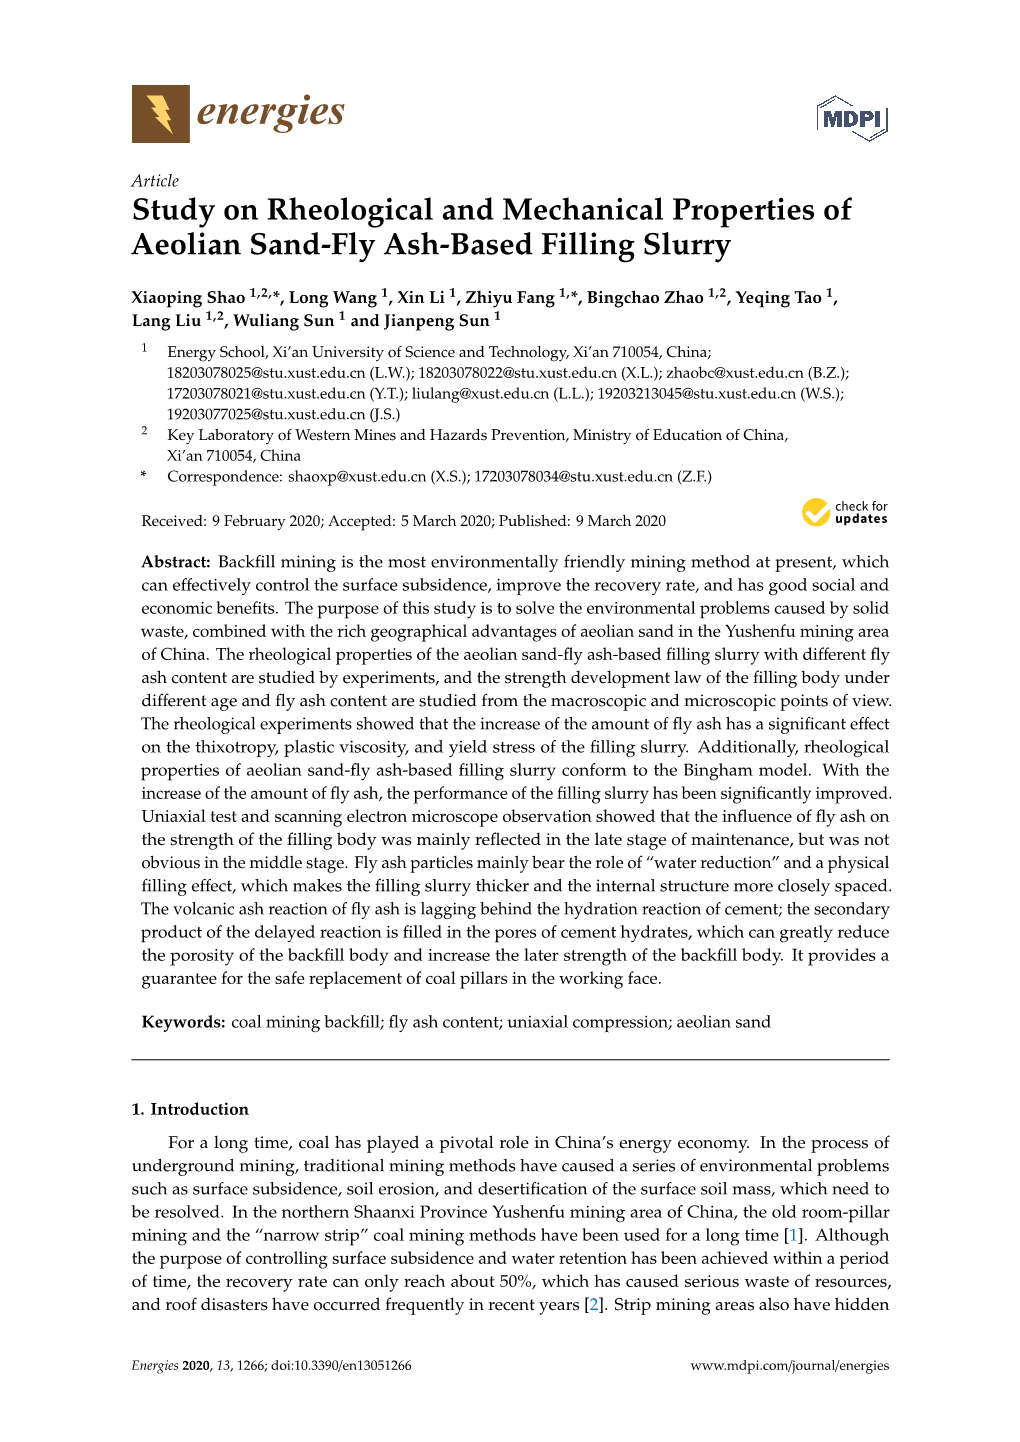 Study on Rheological and Mechanical Properties of Aeolian Sand-Fly Ash-Based Filling Slurry